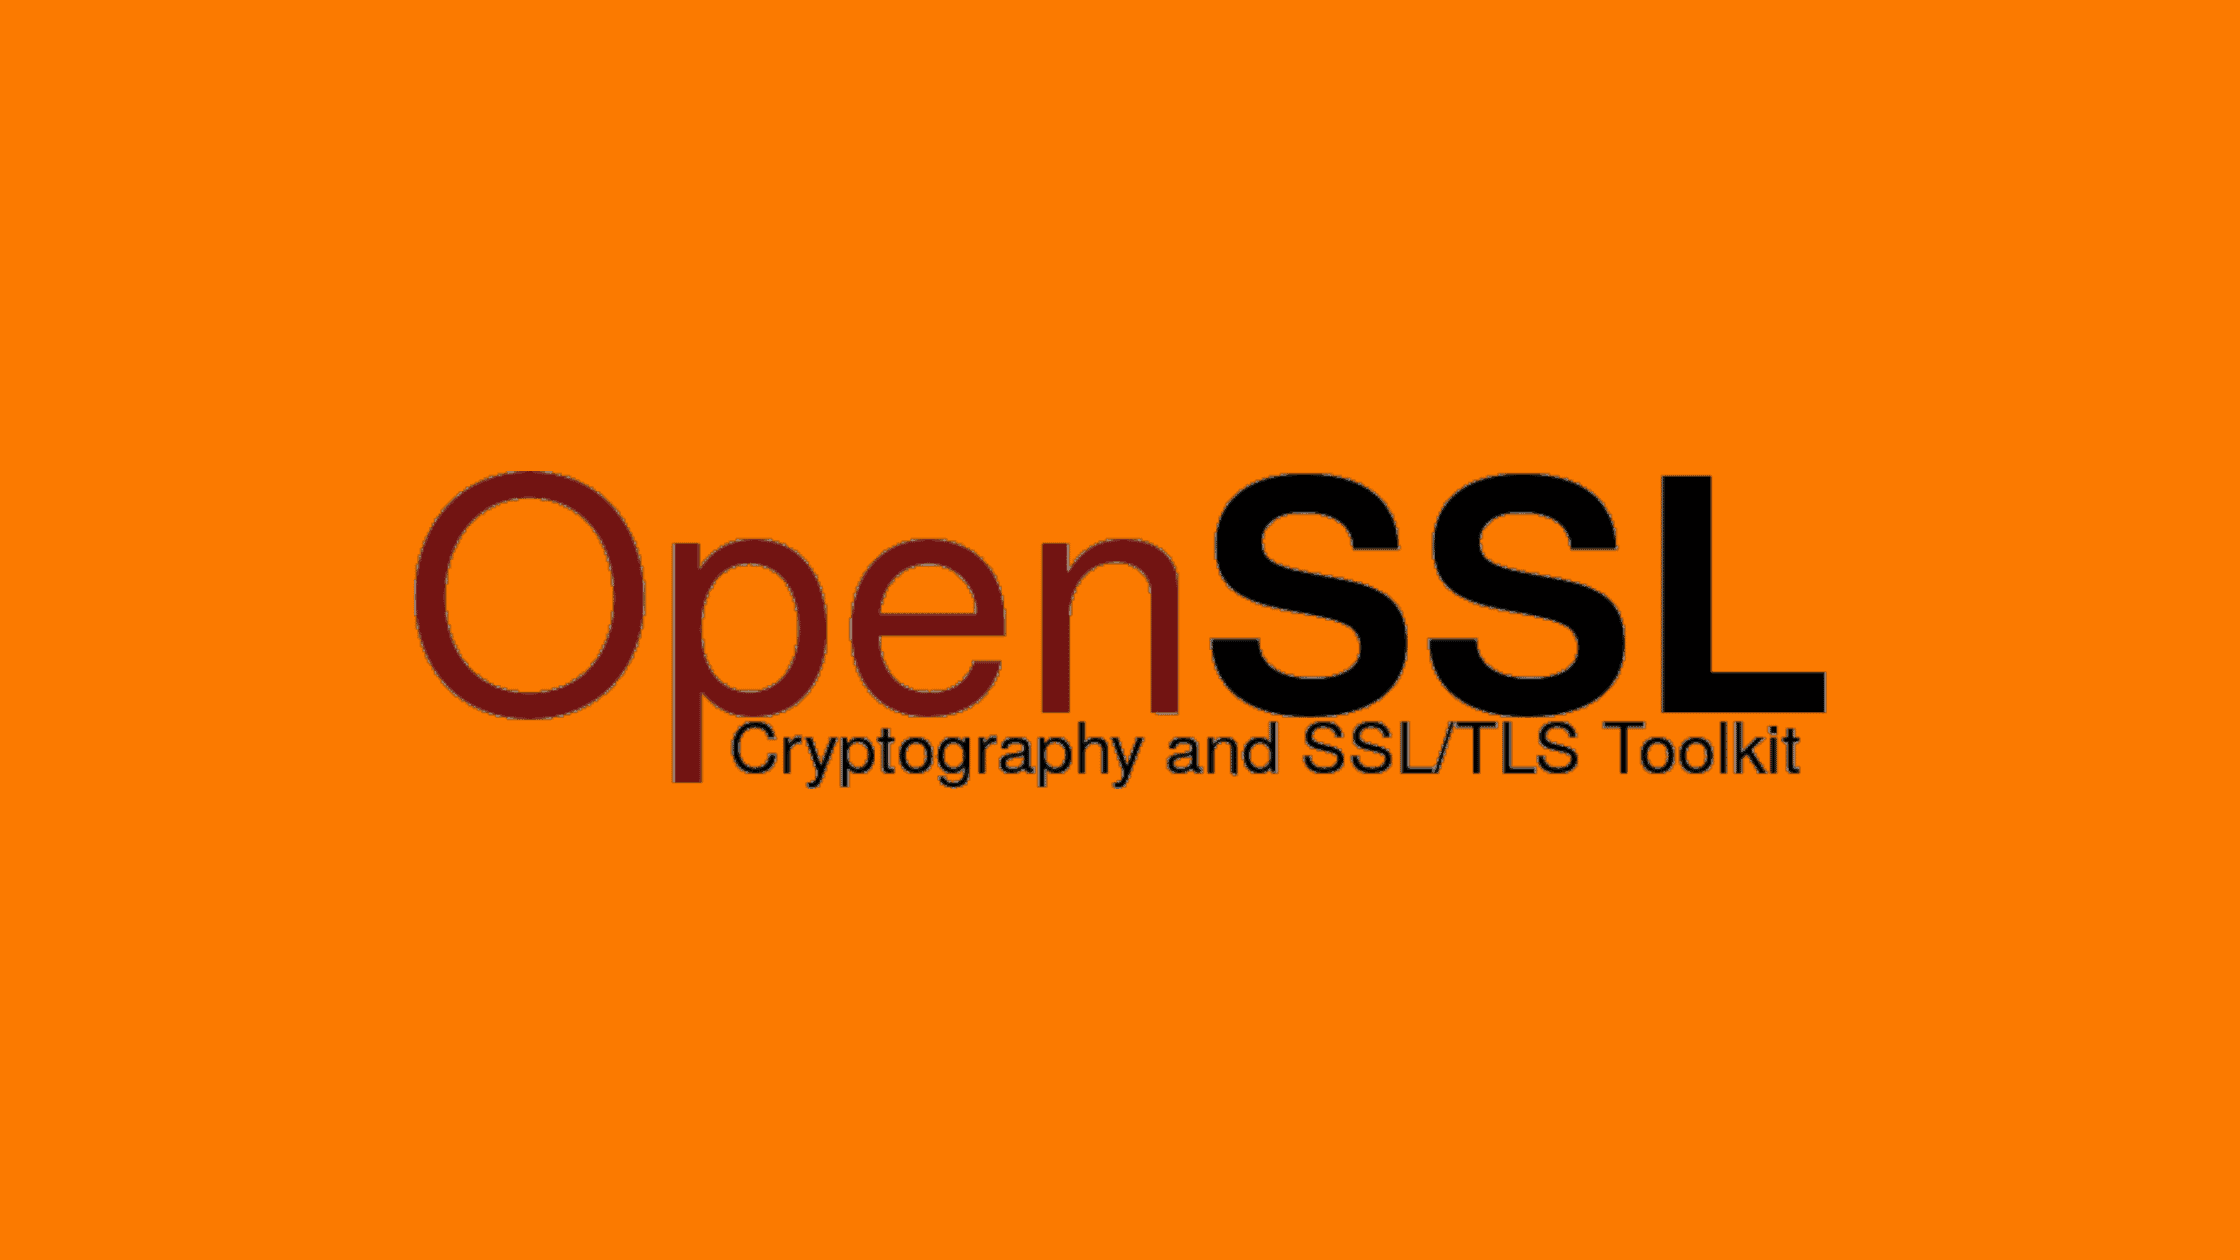 How To Fix Cve 2022 3602 And Cve 2022 3786 The Two New Buffer Overflow Vulnerabilities In Openssl